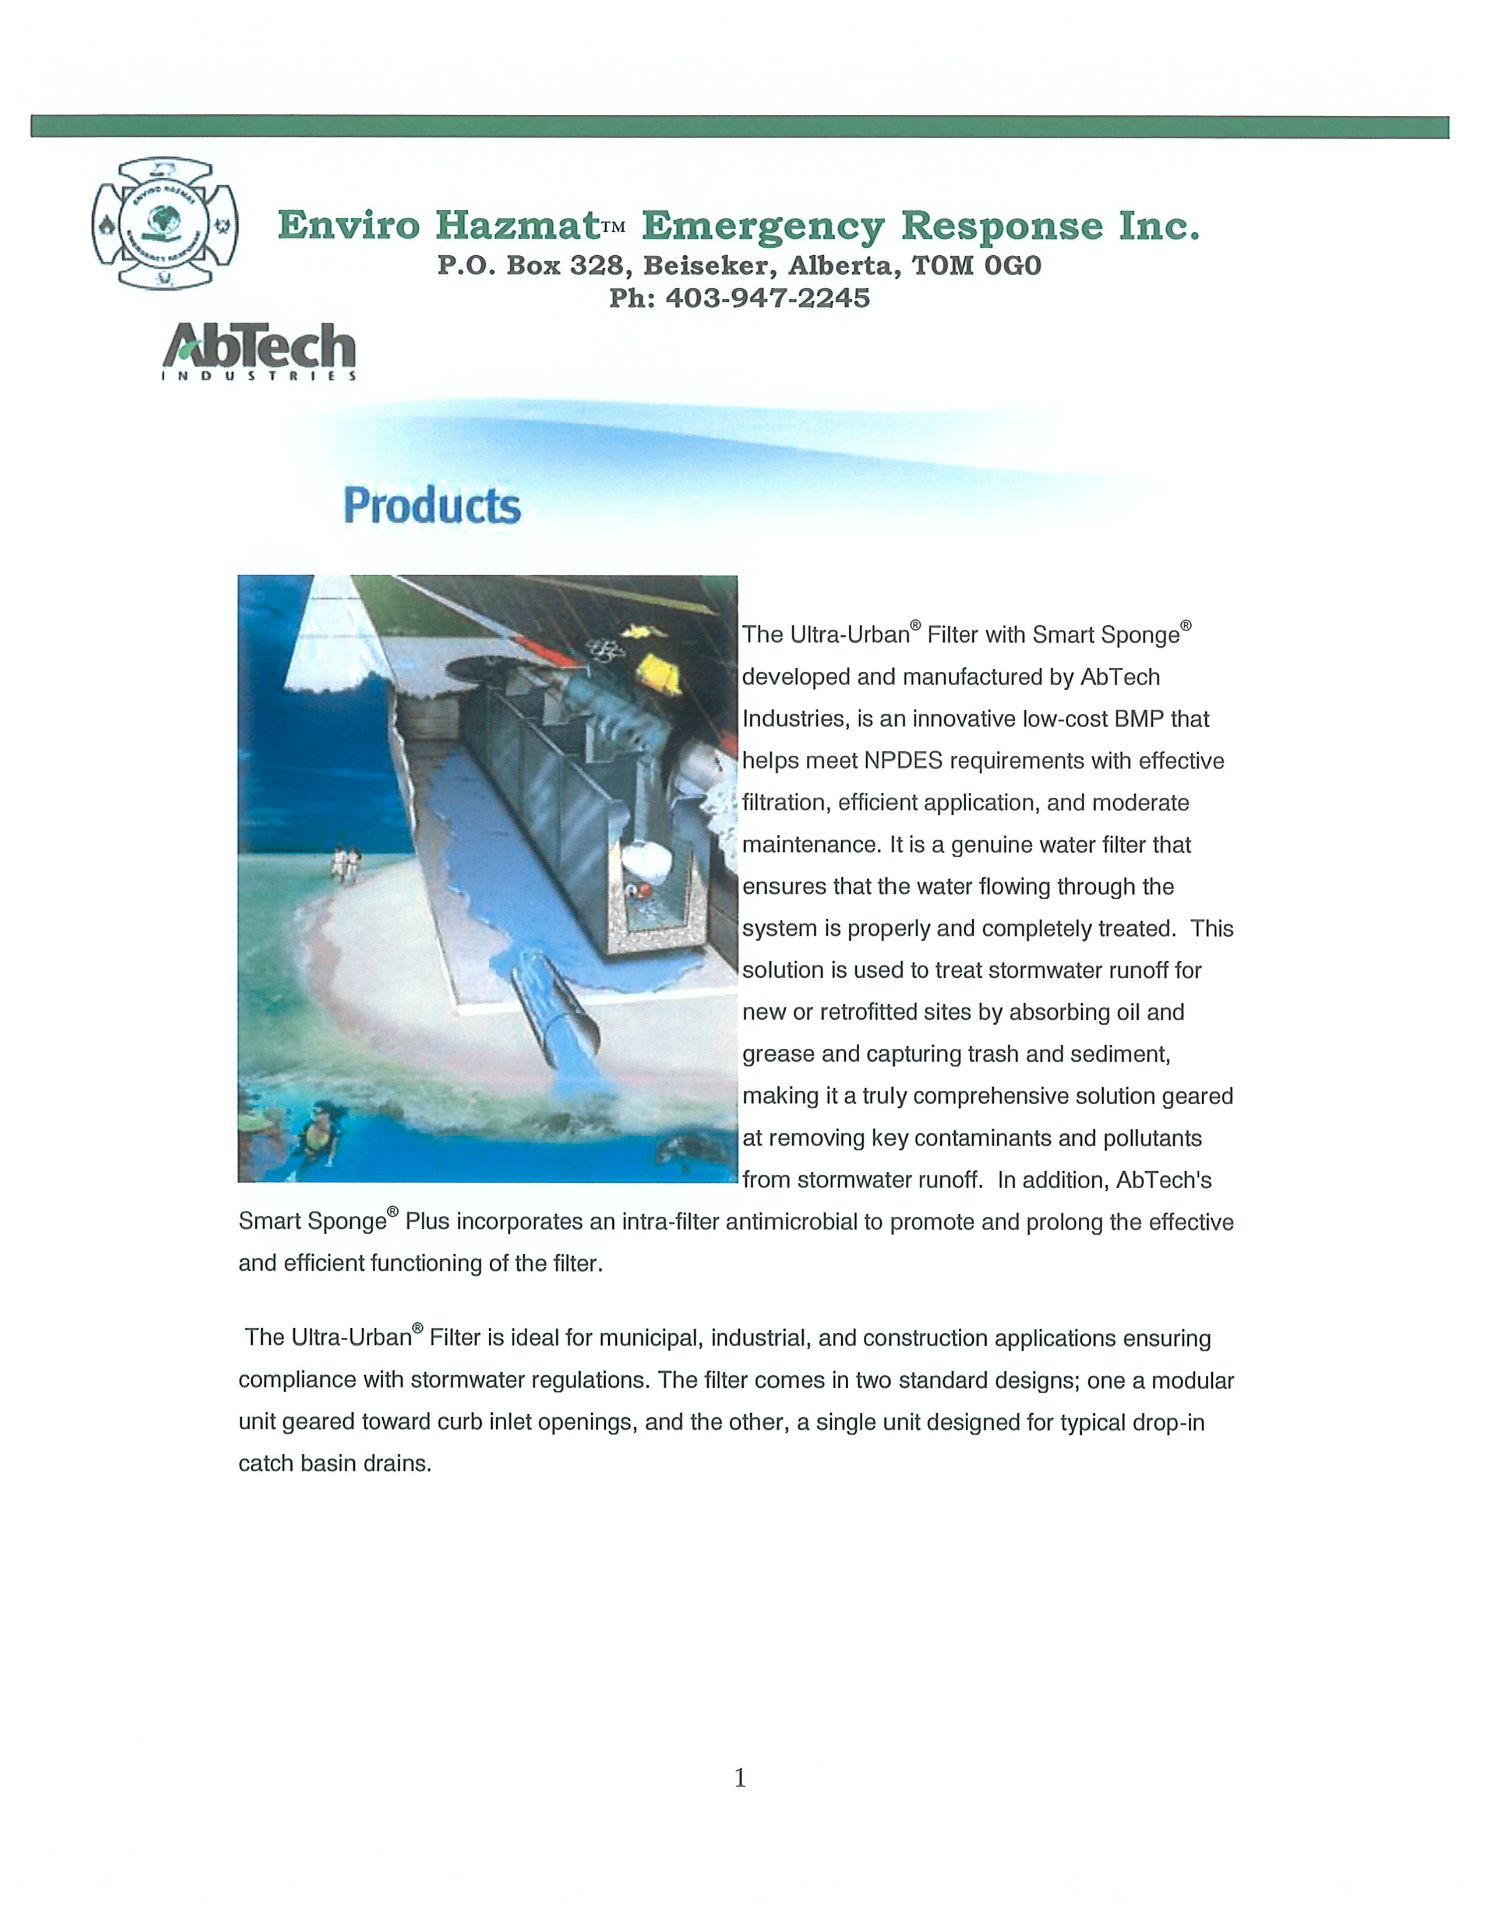 THE ULTRA-URBAN® FILTER WITH SMART SPONGE® BY ABTECH INDUSTRIES - Image 9 of 26